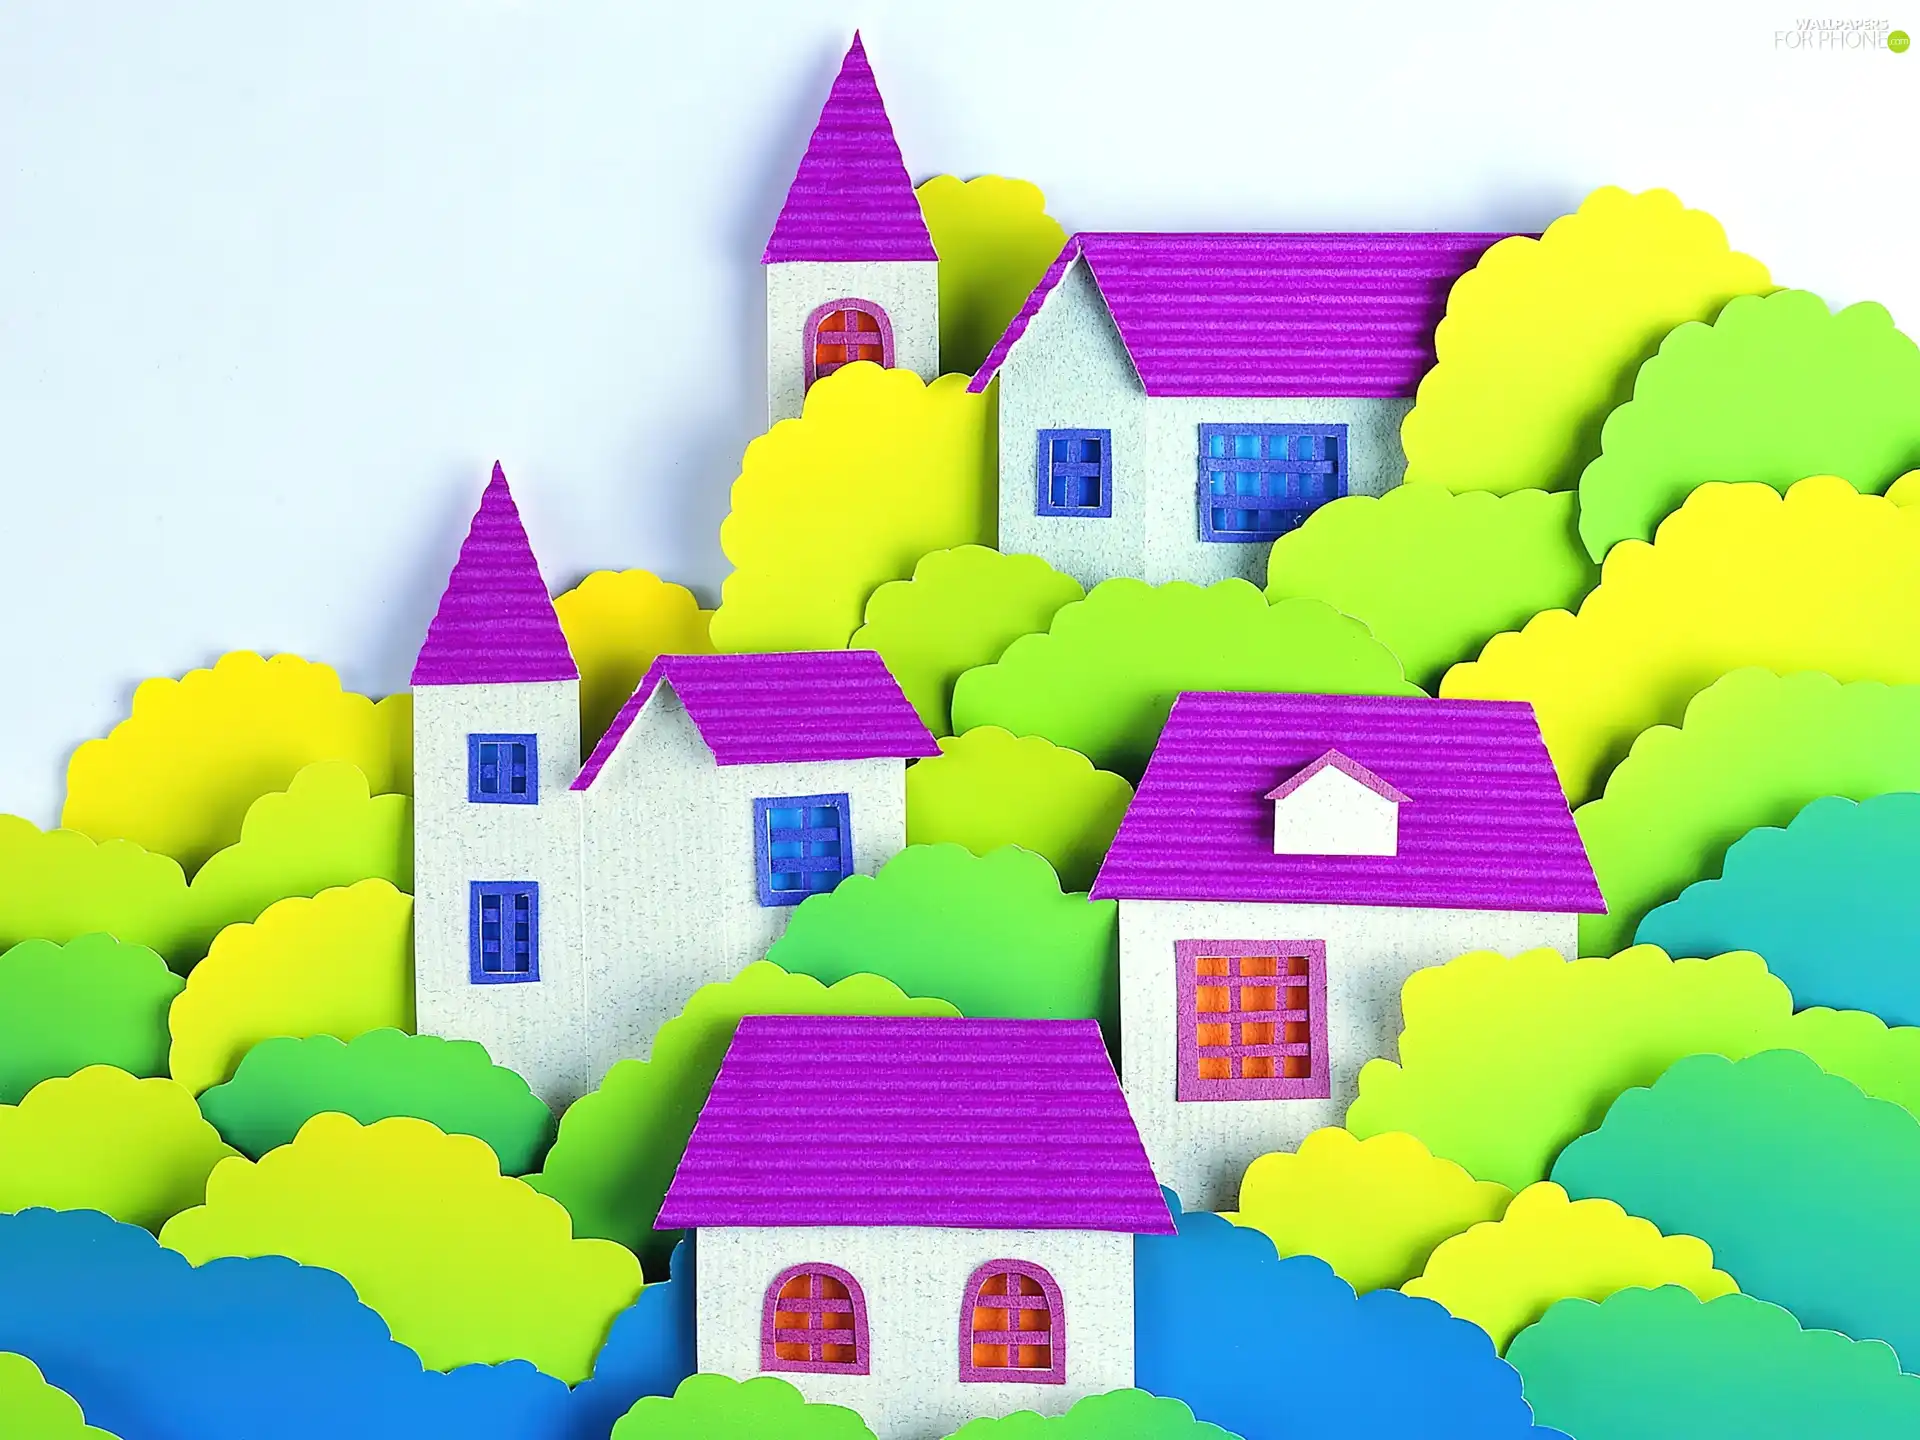 viewes, Cutouts, Houses, trees, Town